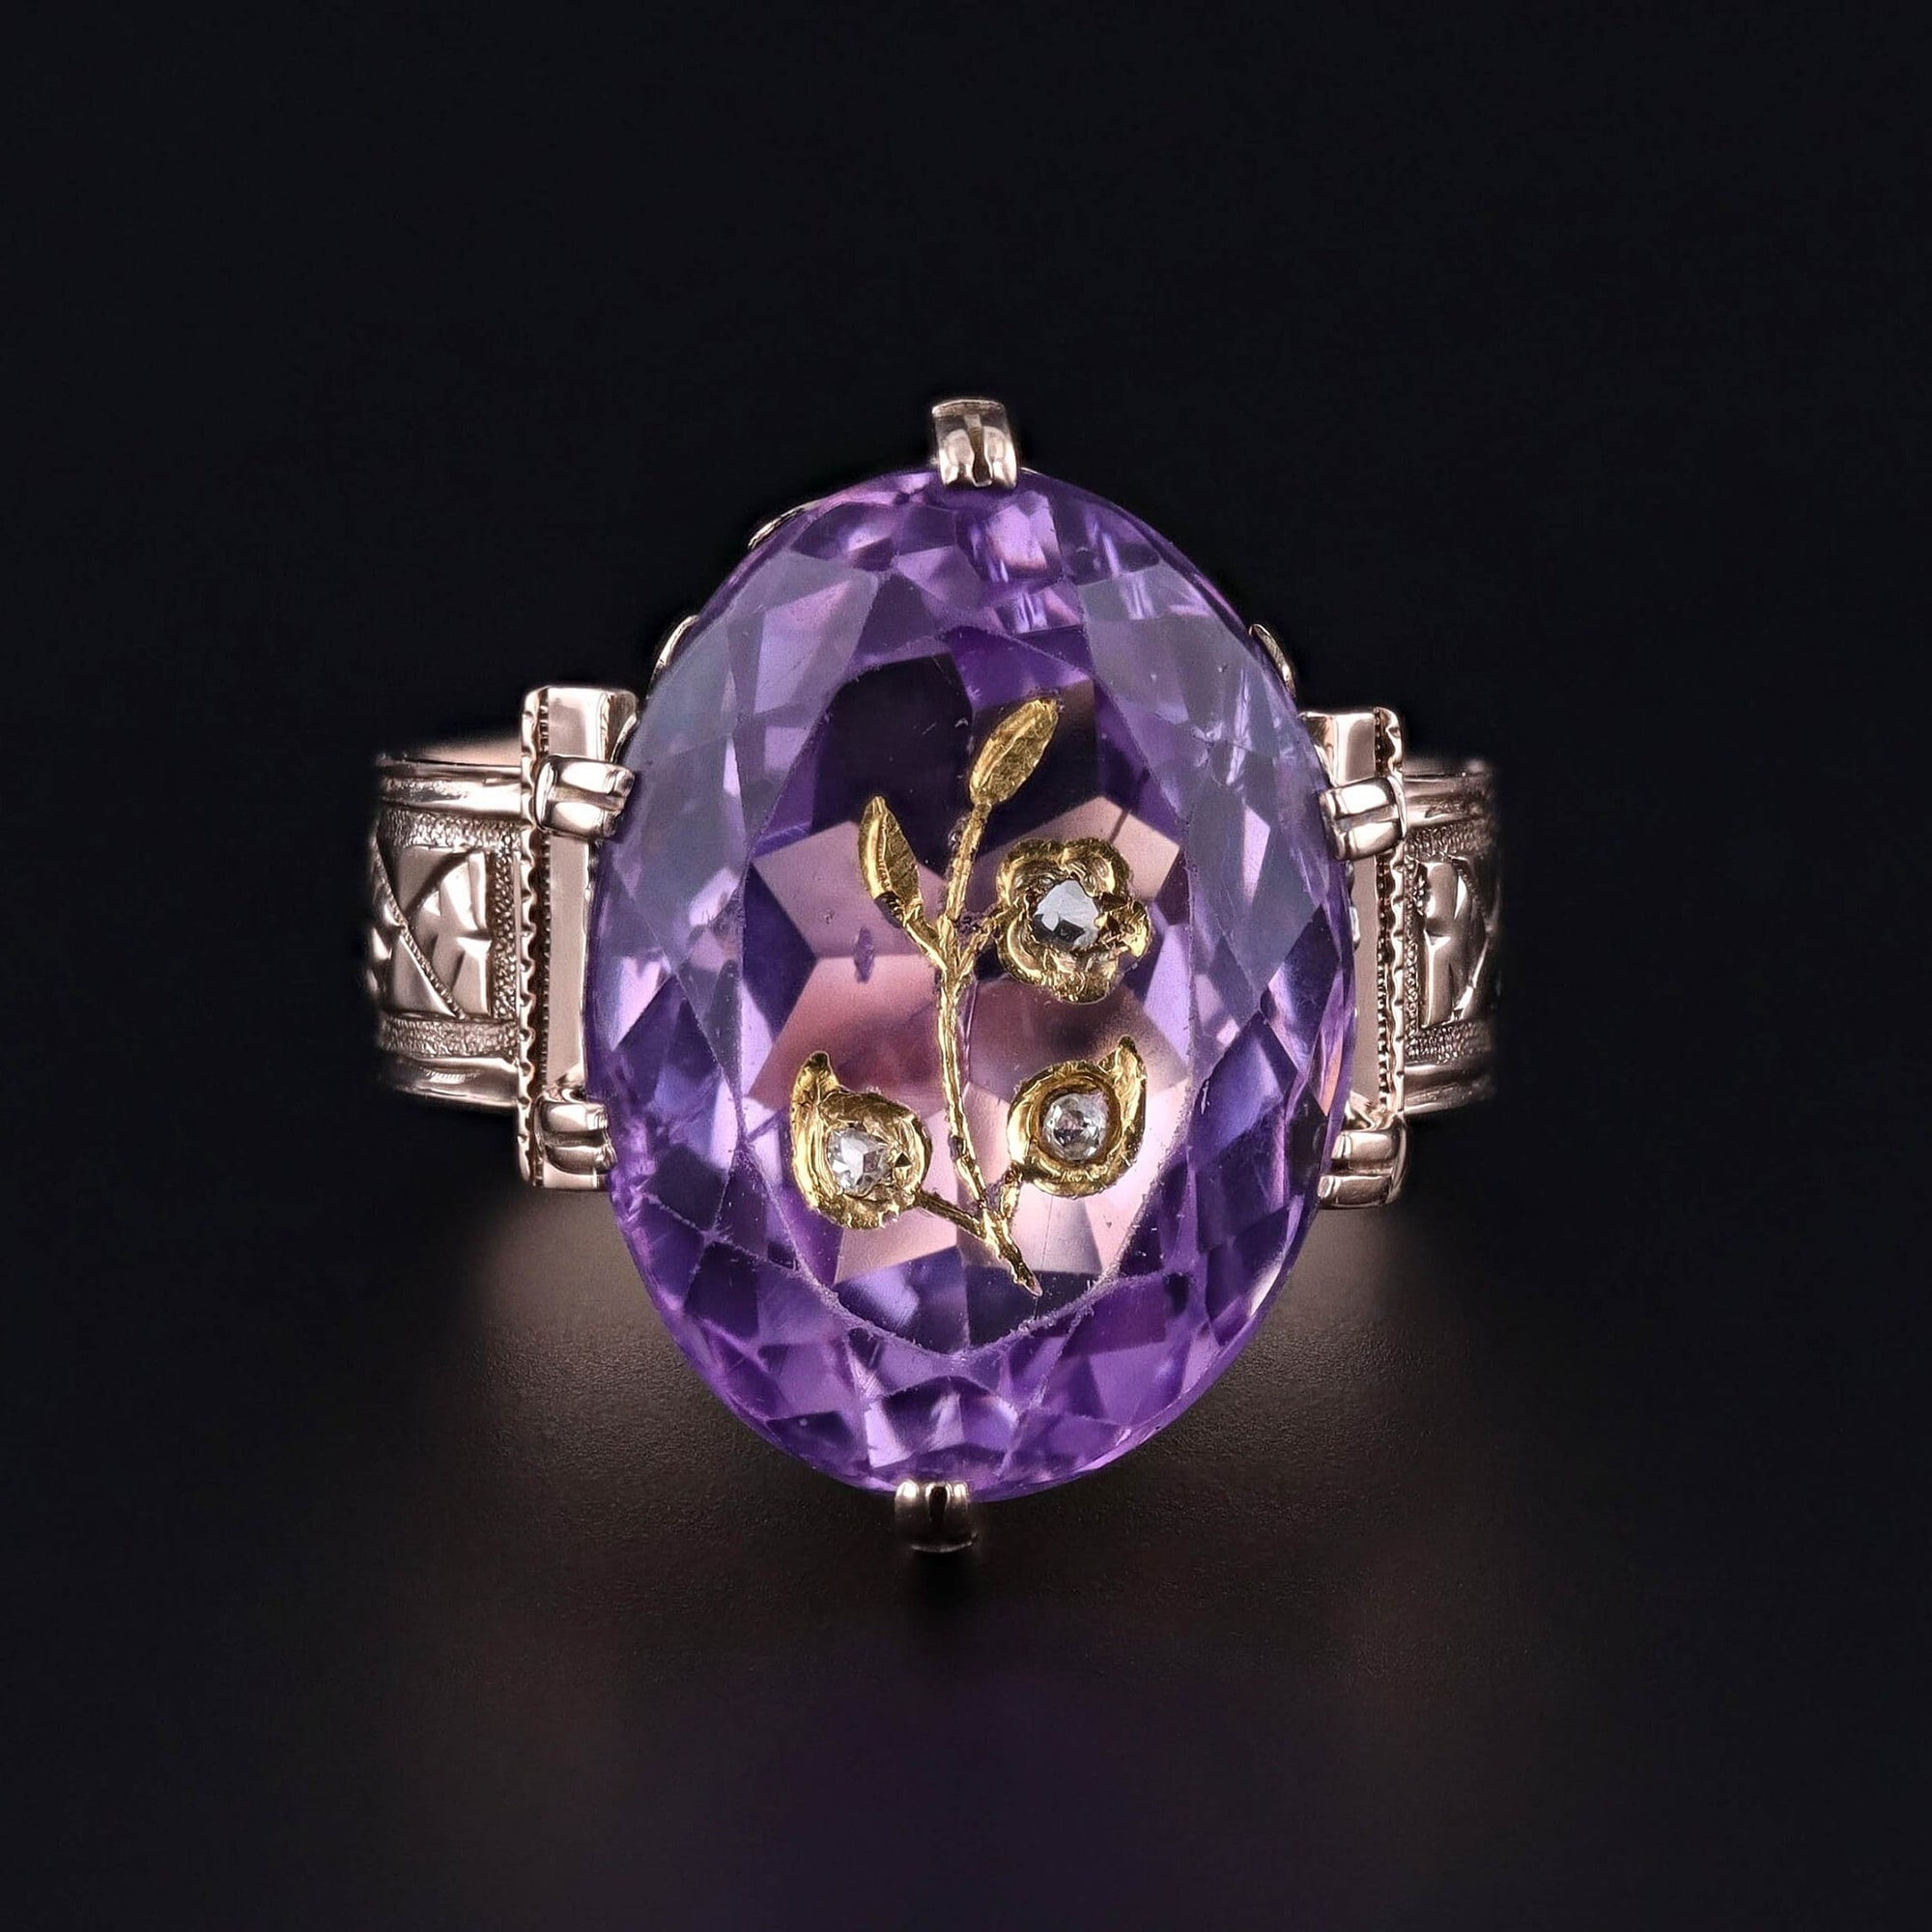 Antique Amethyst Rose of Sharon Ring of 9ct Gold